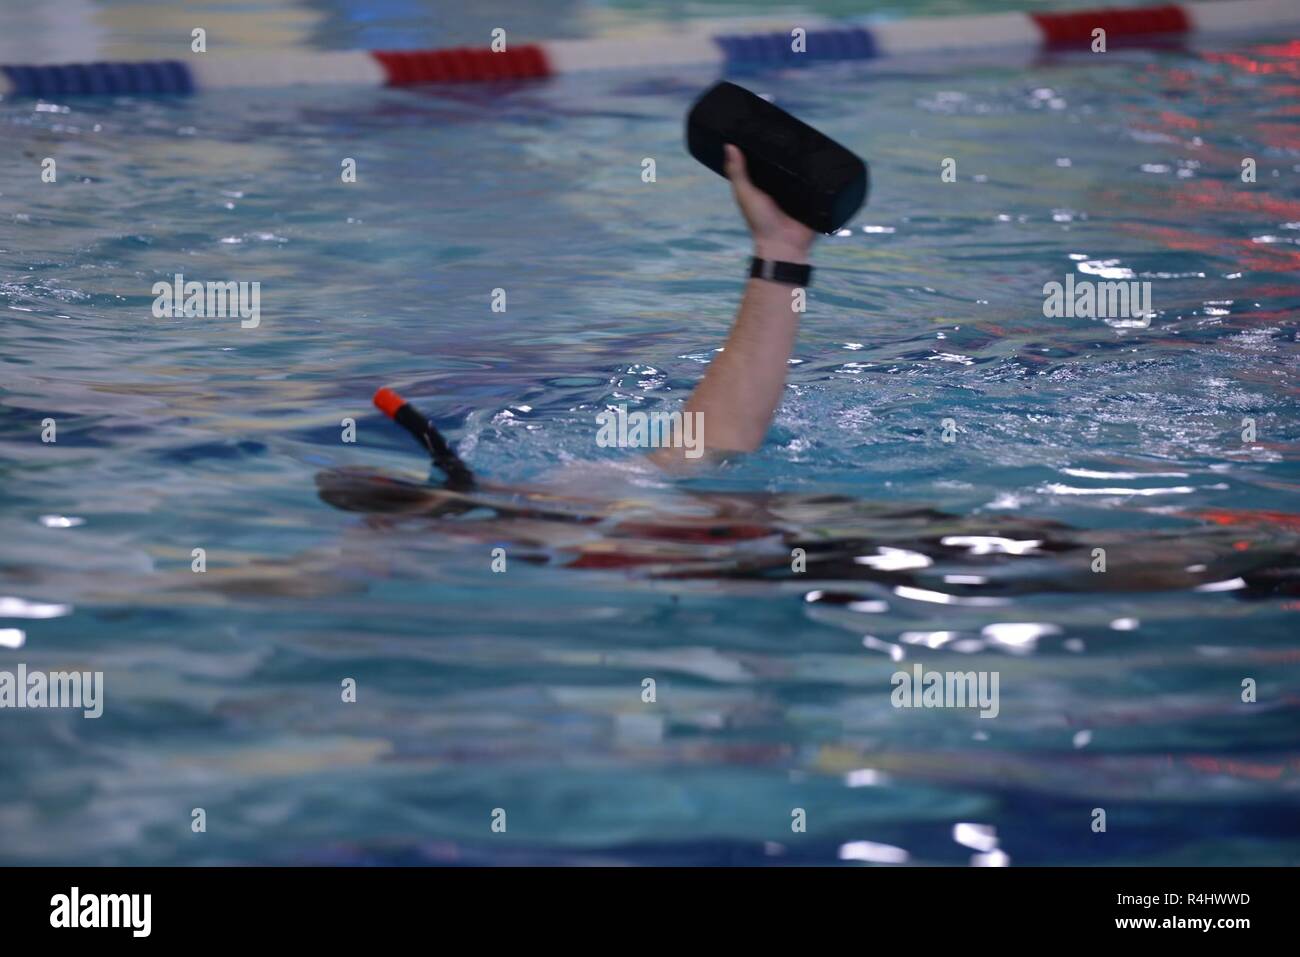 Seaman Ethan Bray, from Coast Guard Sector Columbia River, swims laps as he holds a 10-pound brick out of the water during training at the Astoria Aquatic Center in Astoria, Ore., Sept. 25, 2018.    This training is used to simulate immobilizing much of the upper body, so the swimmer has to use the legs to move through the water as they would need to do during a rescue of a person.    U.S. Coast Guard Stock Photo